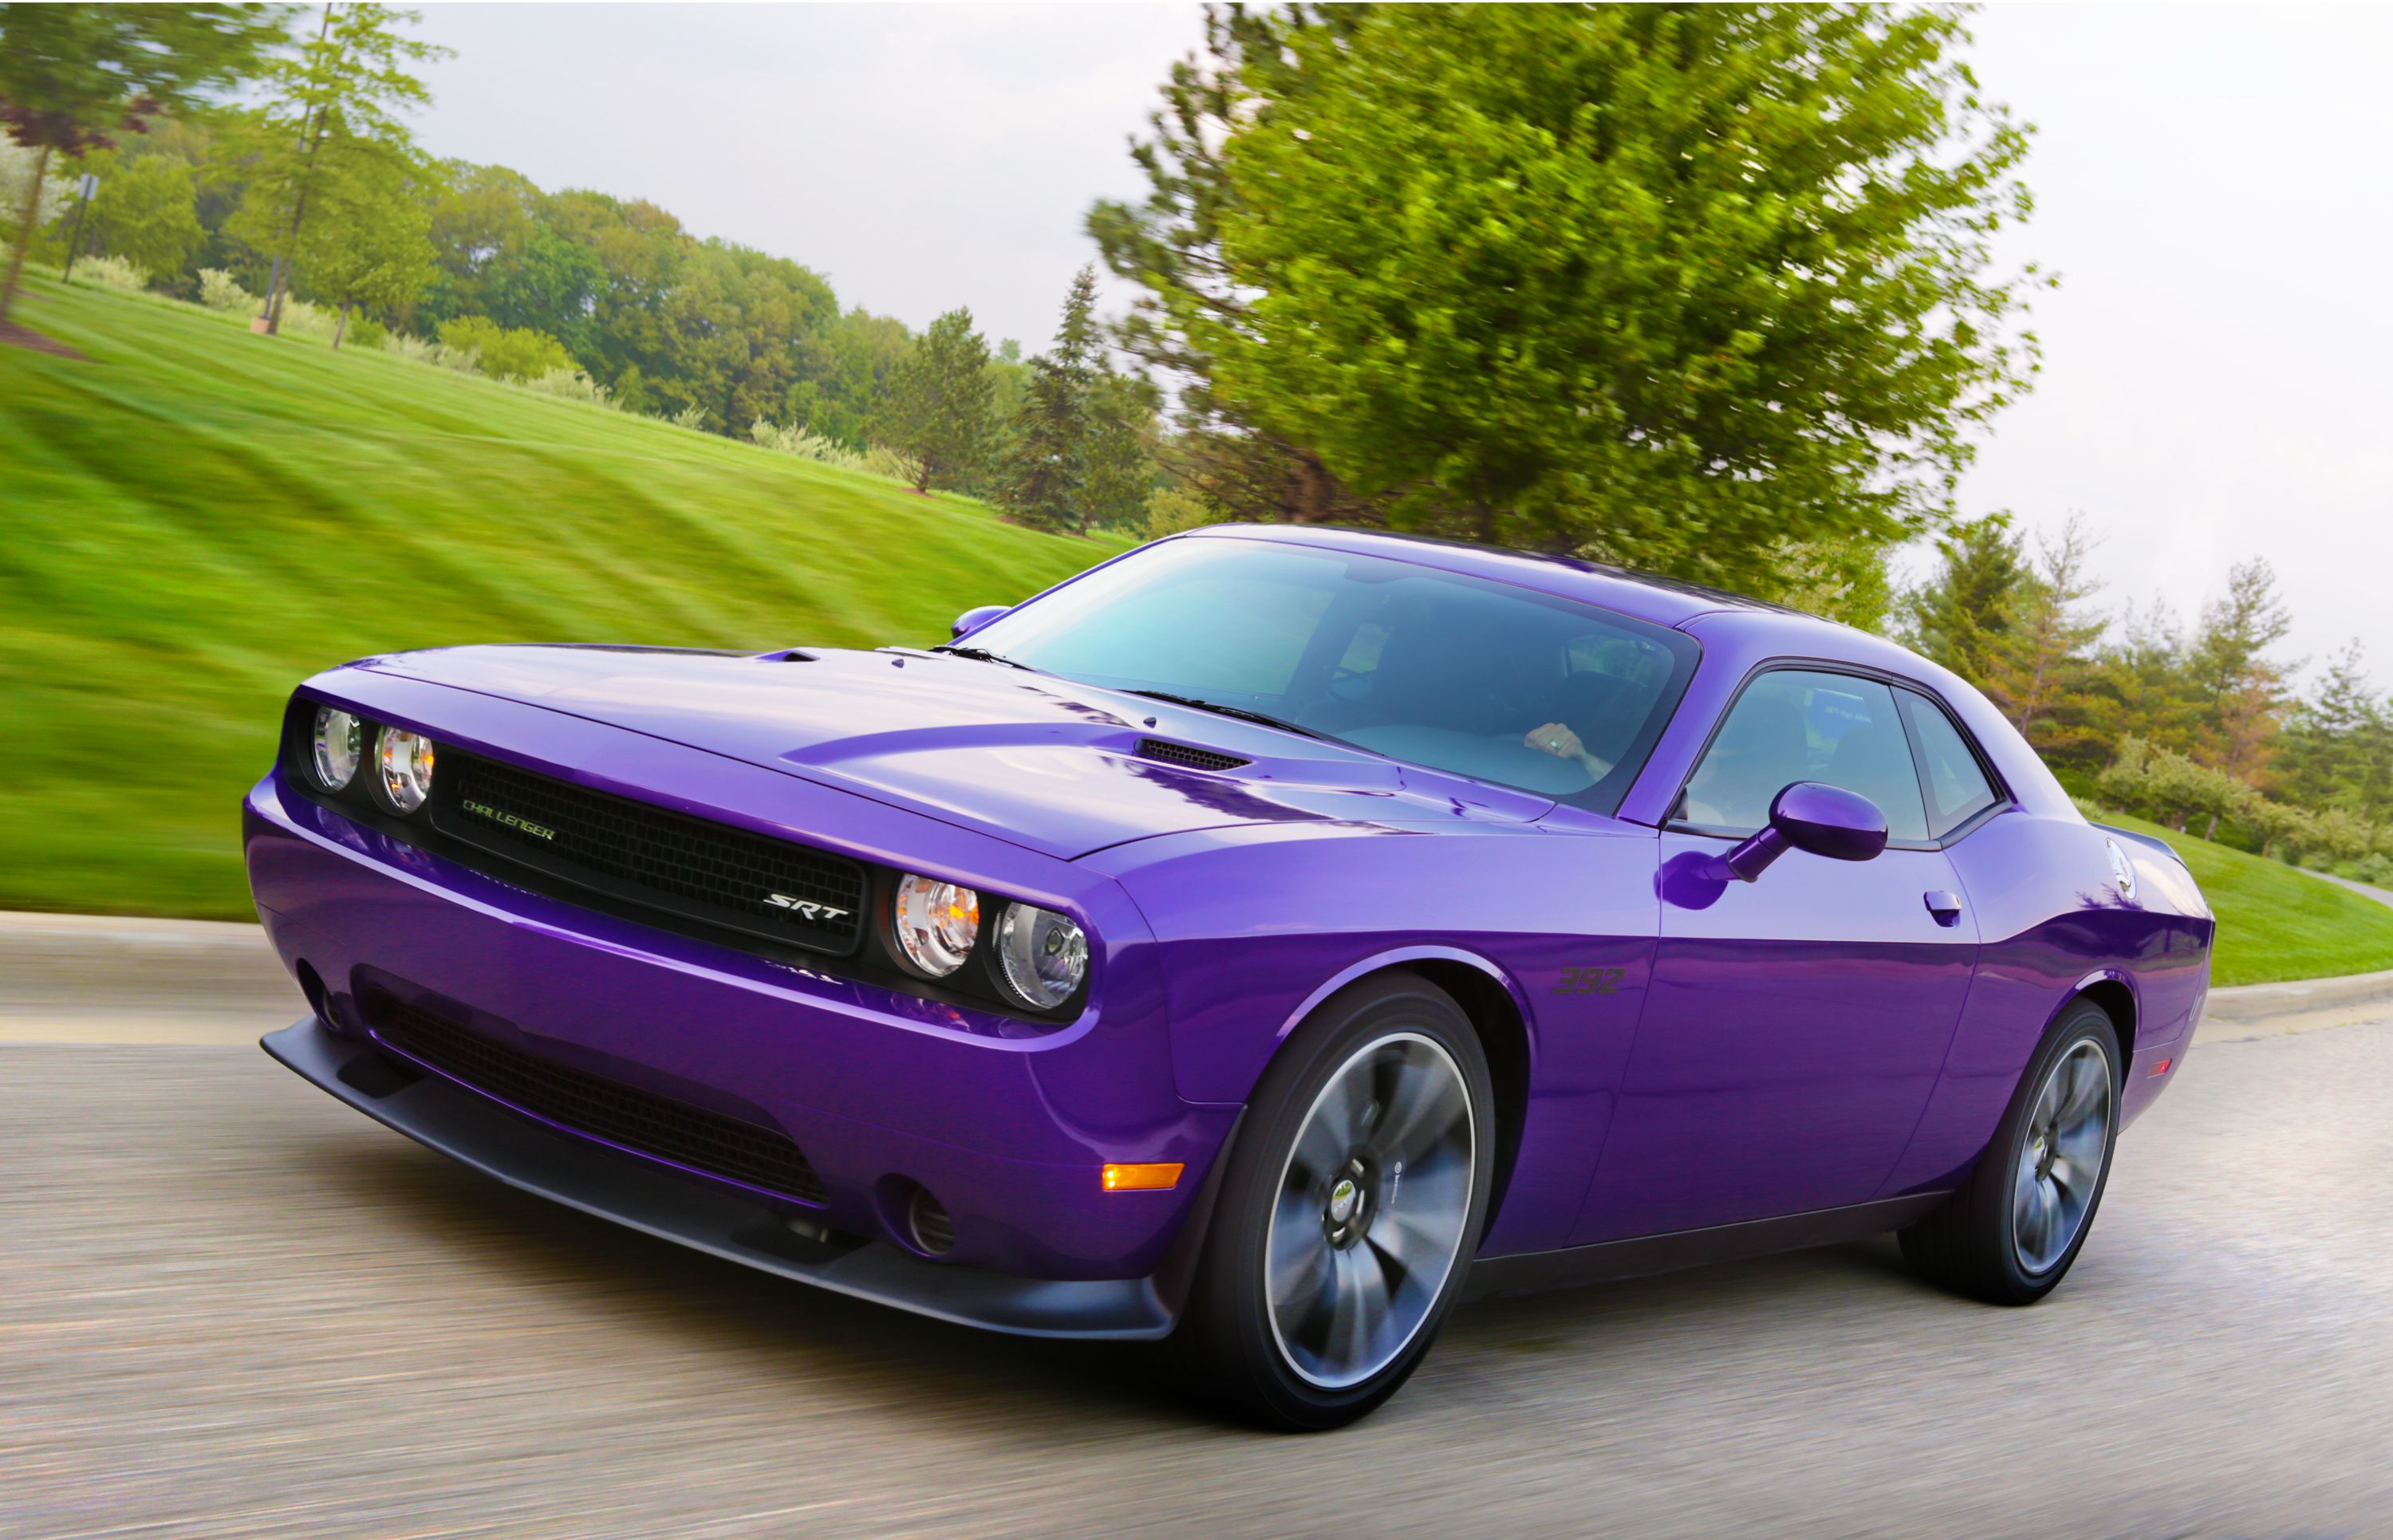 2014 - 2015 Next Dodge Challenger Could Deliver More Power Than the SRT Viper